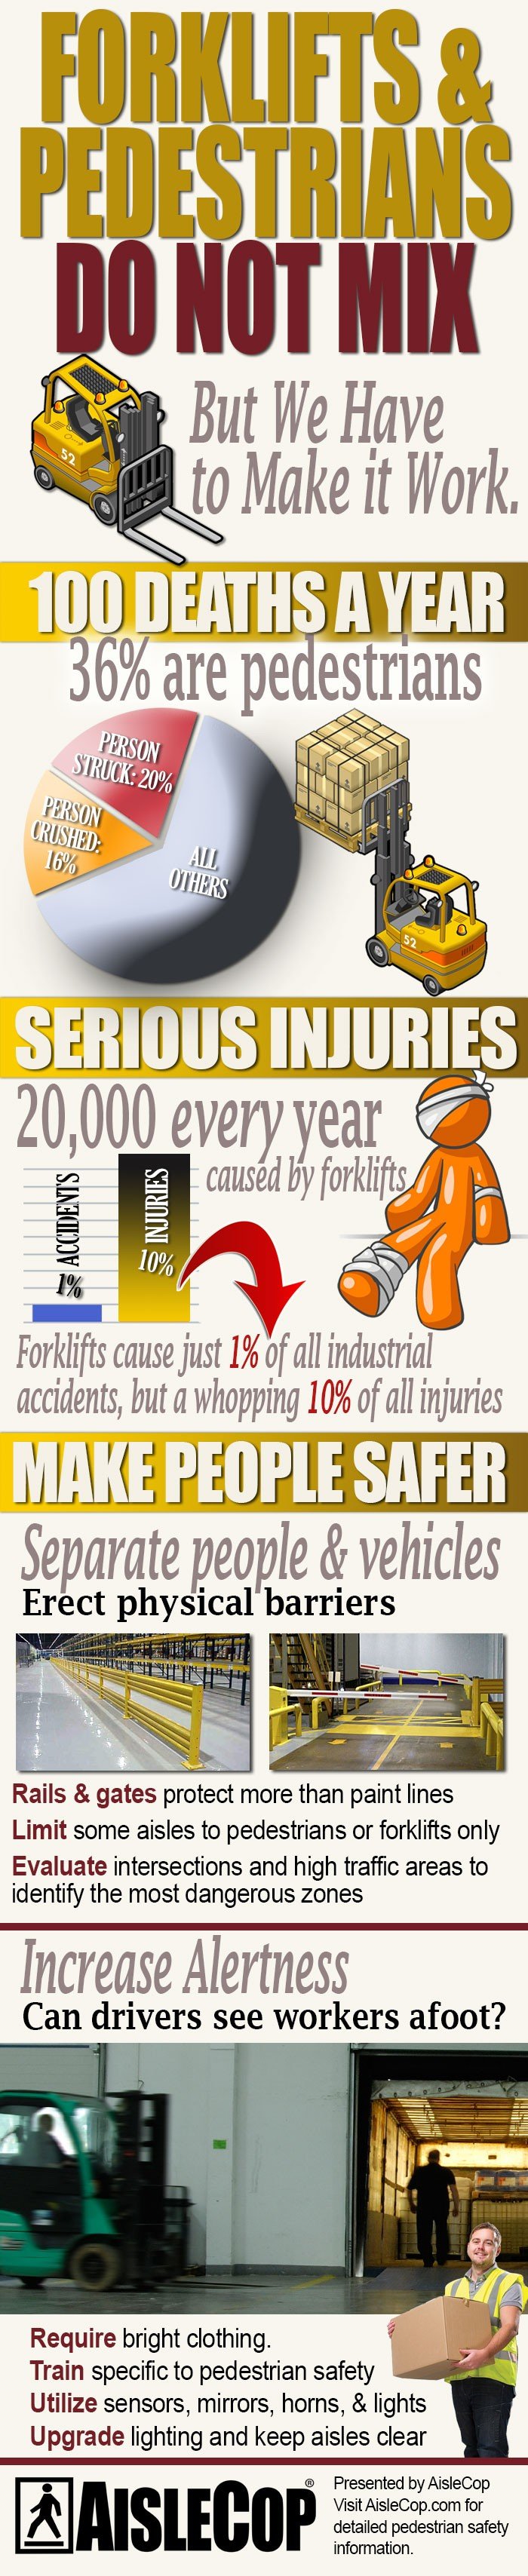 forklift safety infographic